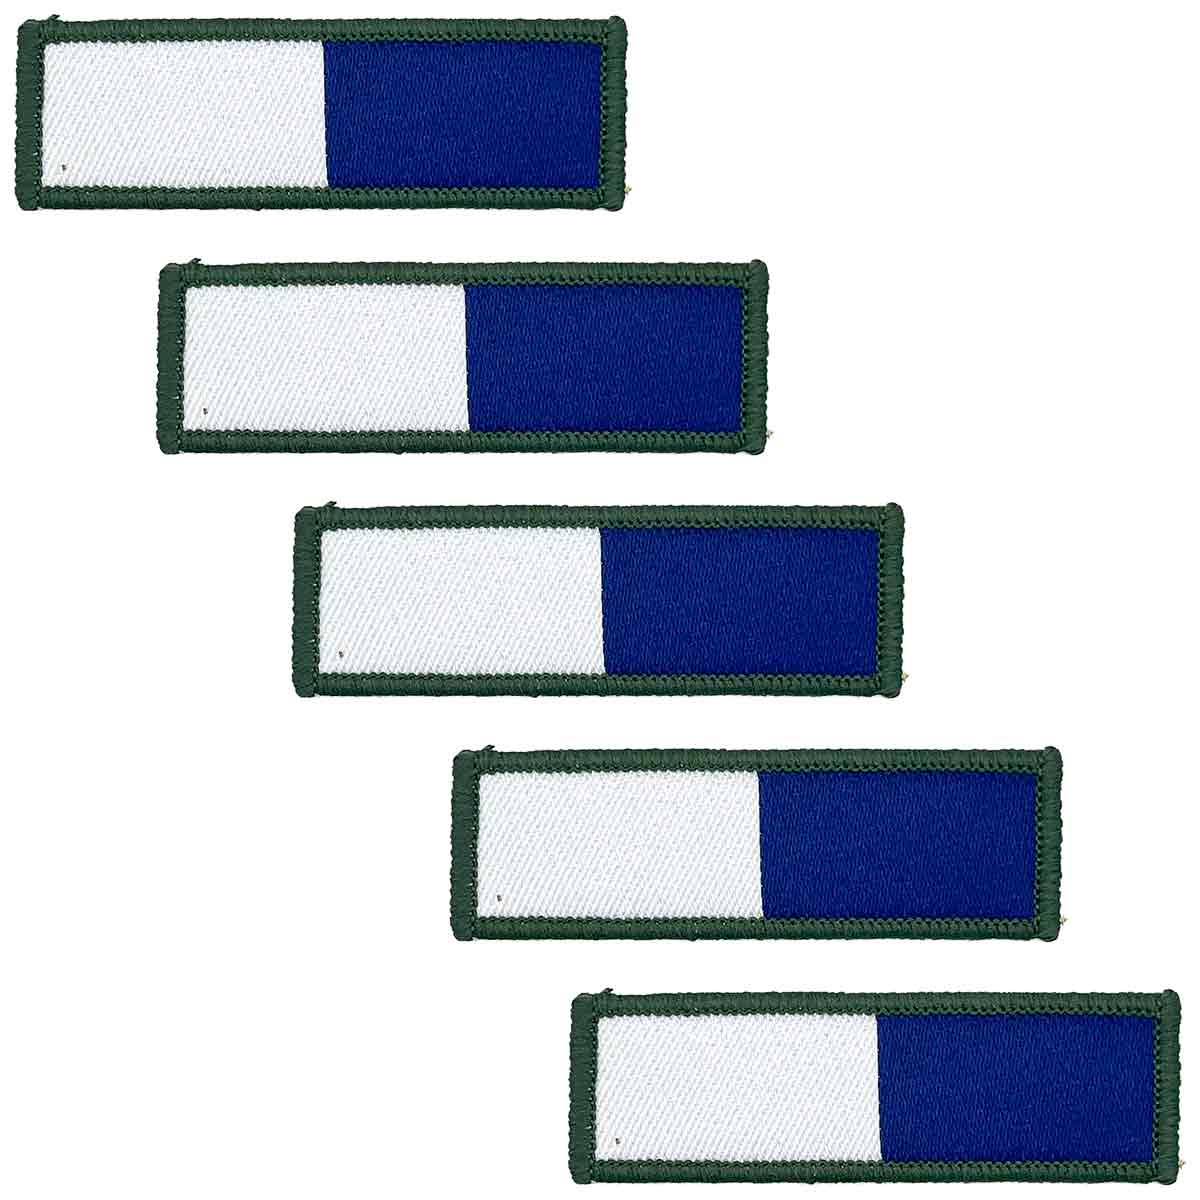 Royal Signals TRF - Iron or Sewn On Patch - John Bull Clothing